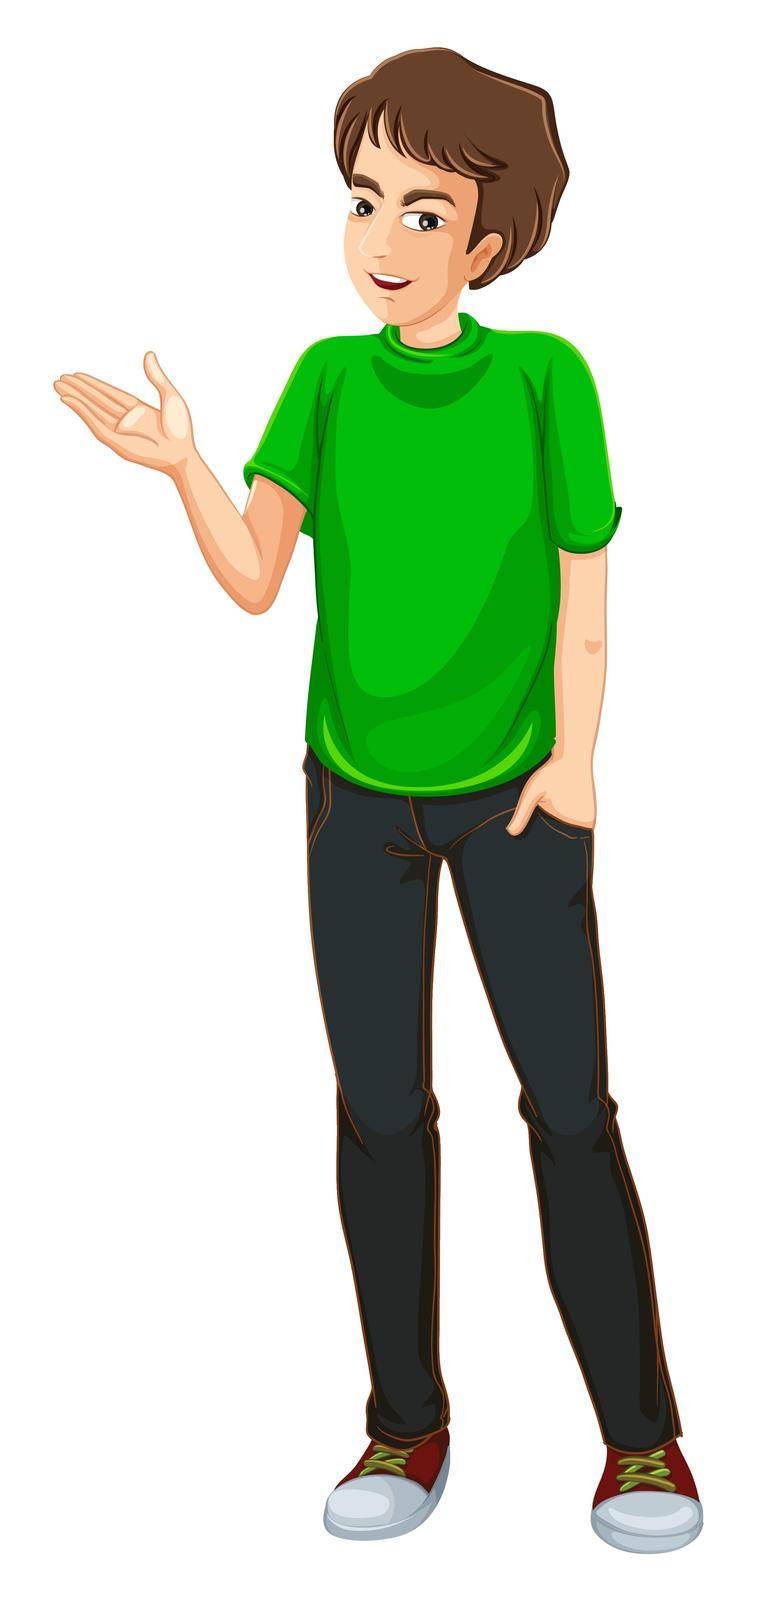 A Young Man wearing a green shirt by iimages